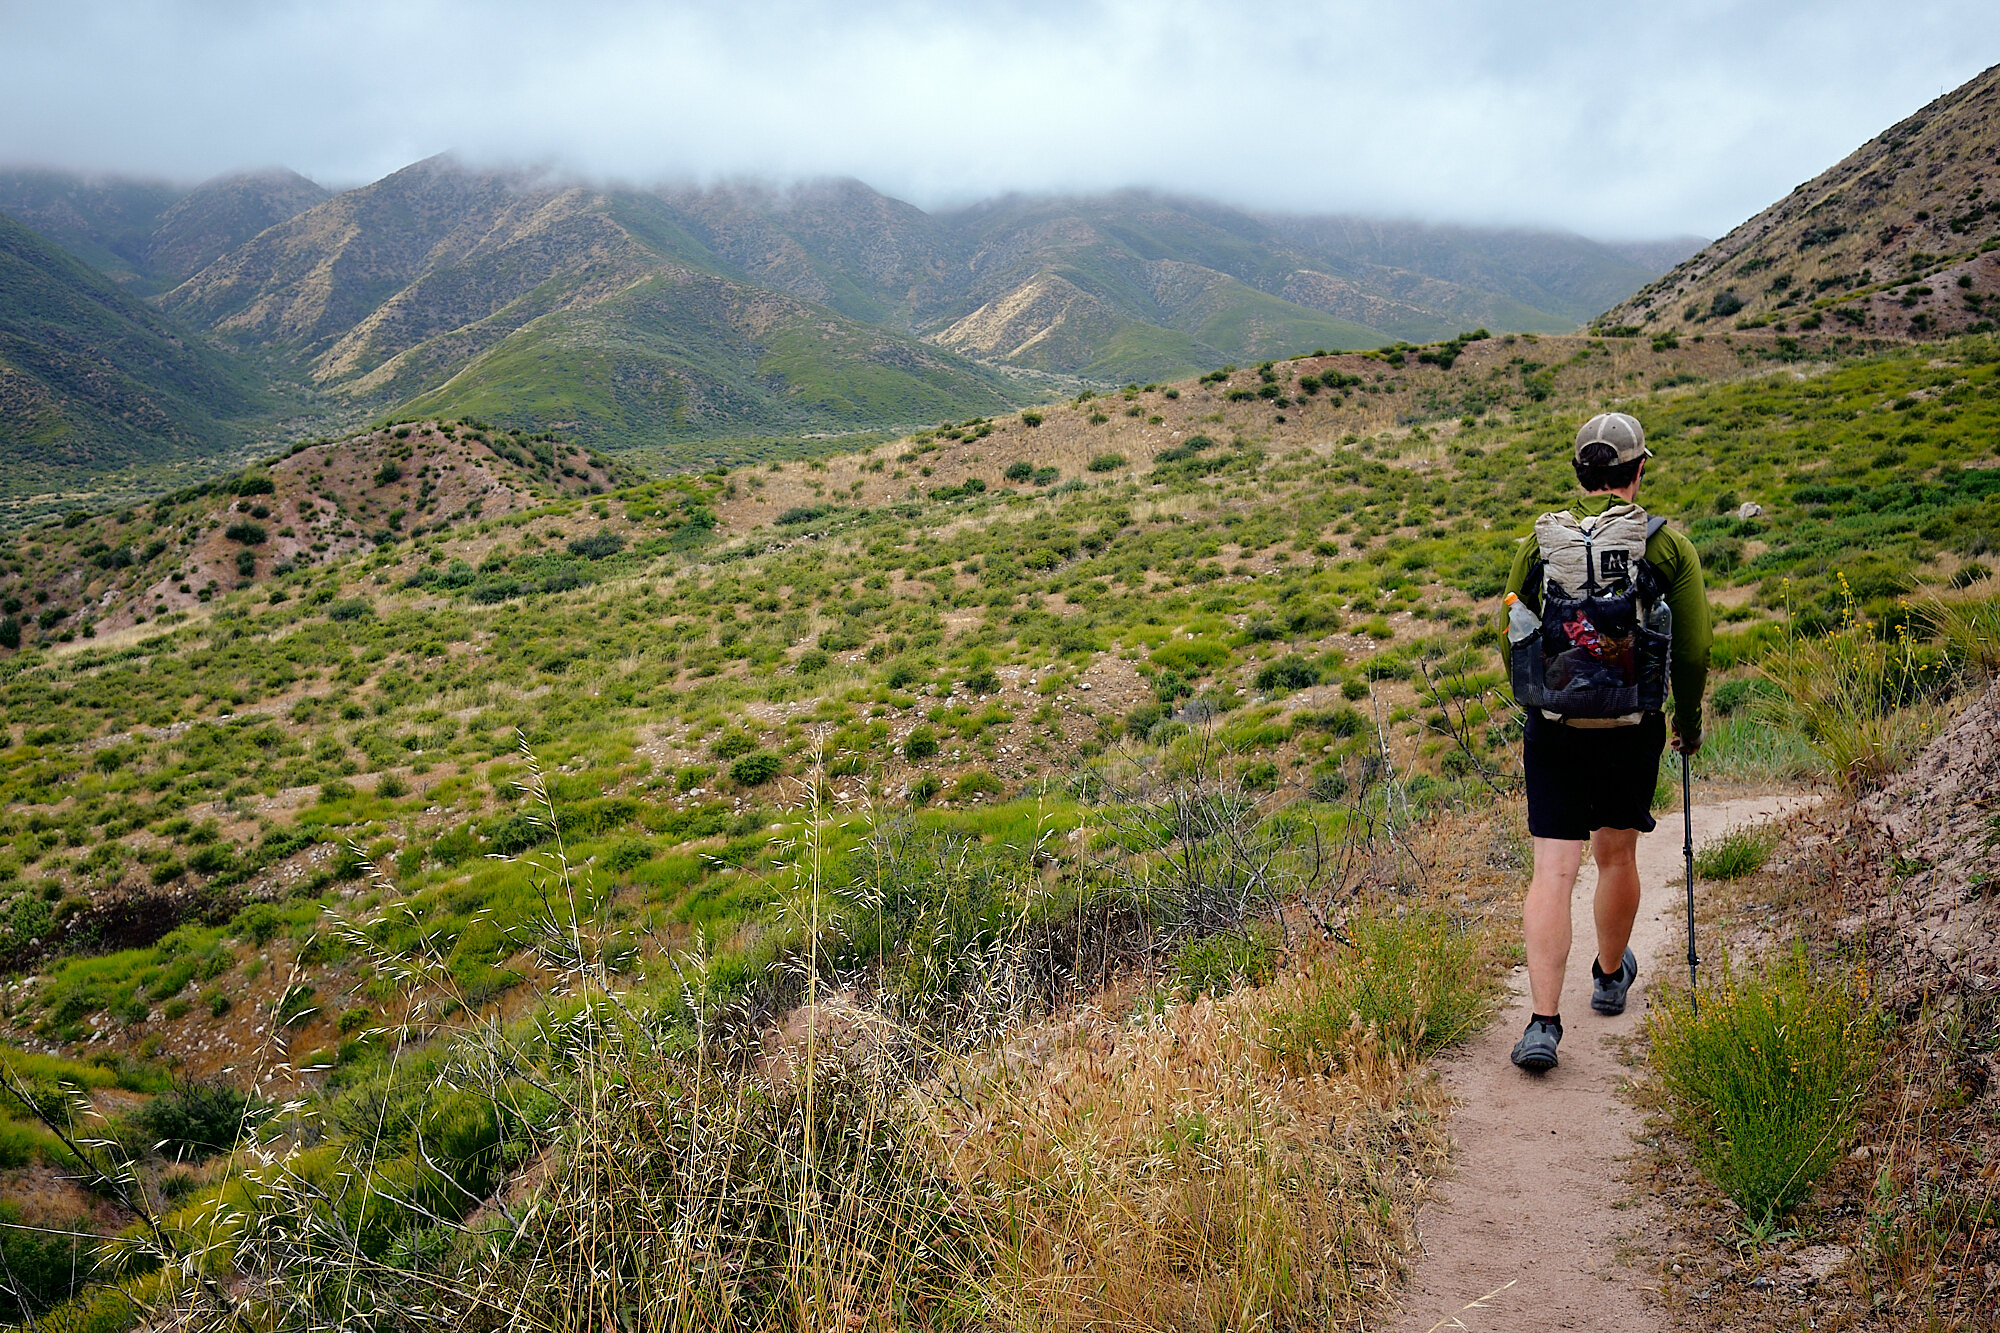  Lancelot on the approach to Mt. Baldy. Luckily the clouds lifted by the time the trail had a clear view of the summit. | 5/27/19 Mile 346.0, 3,568' 